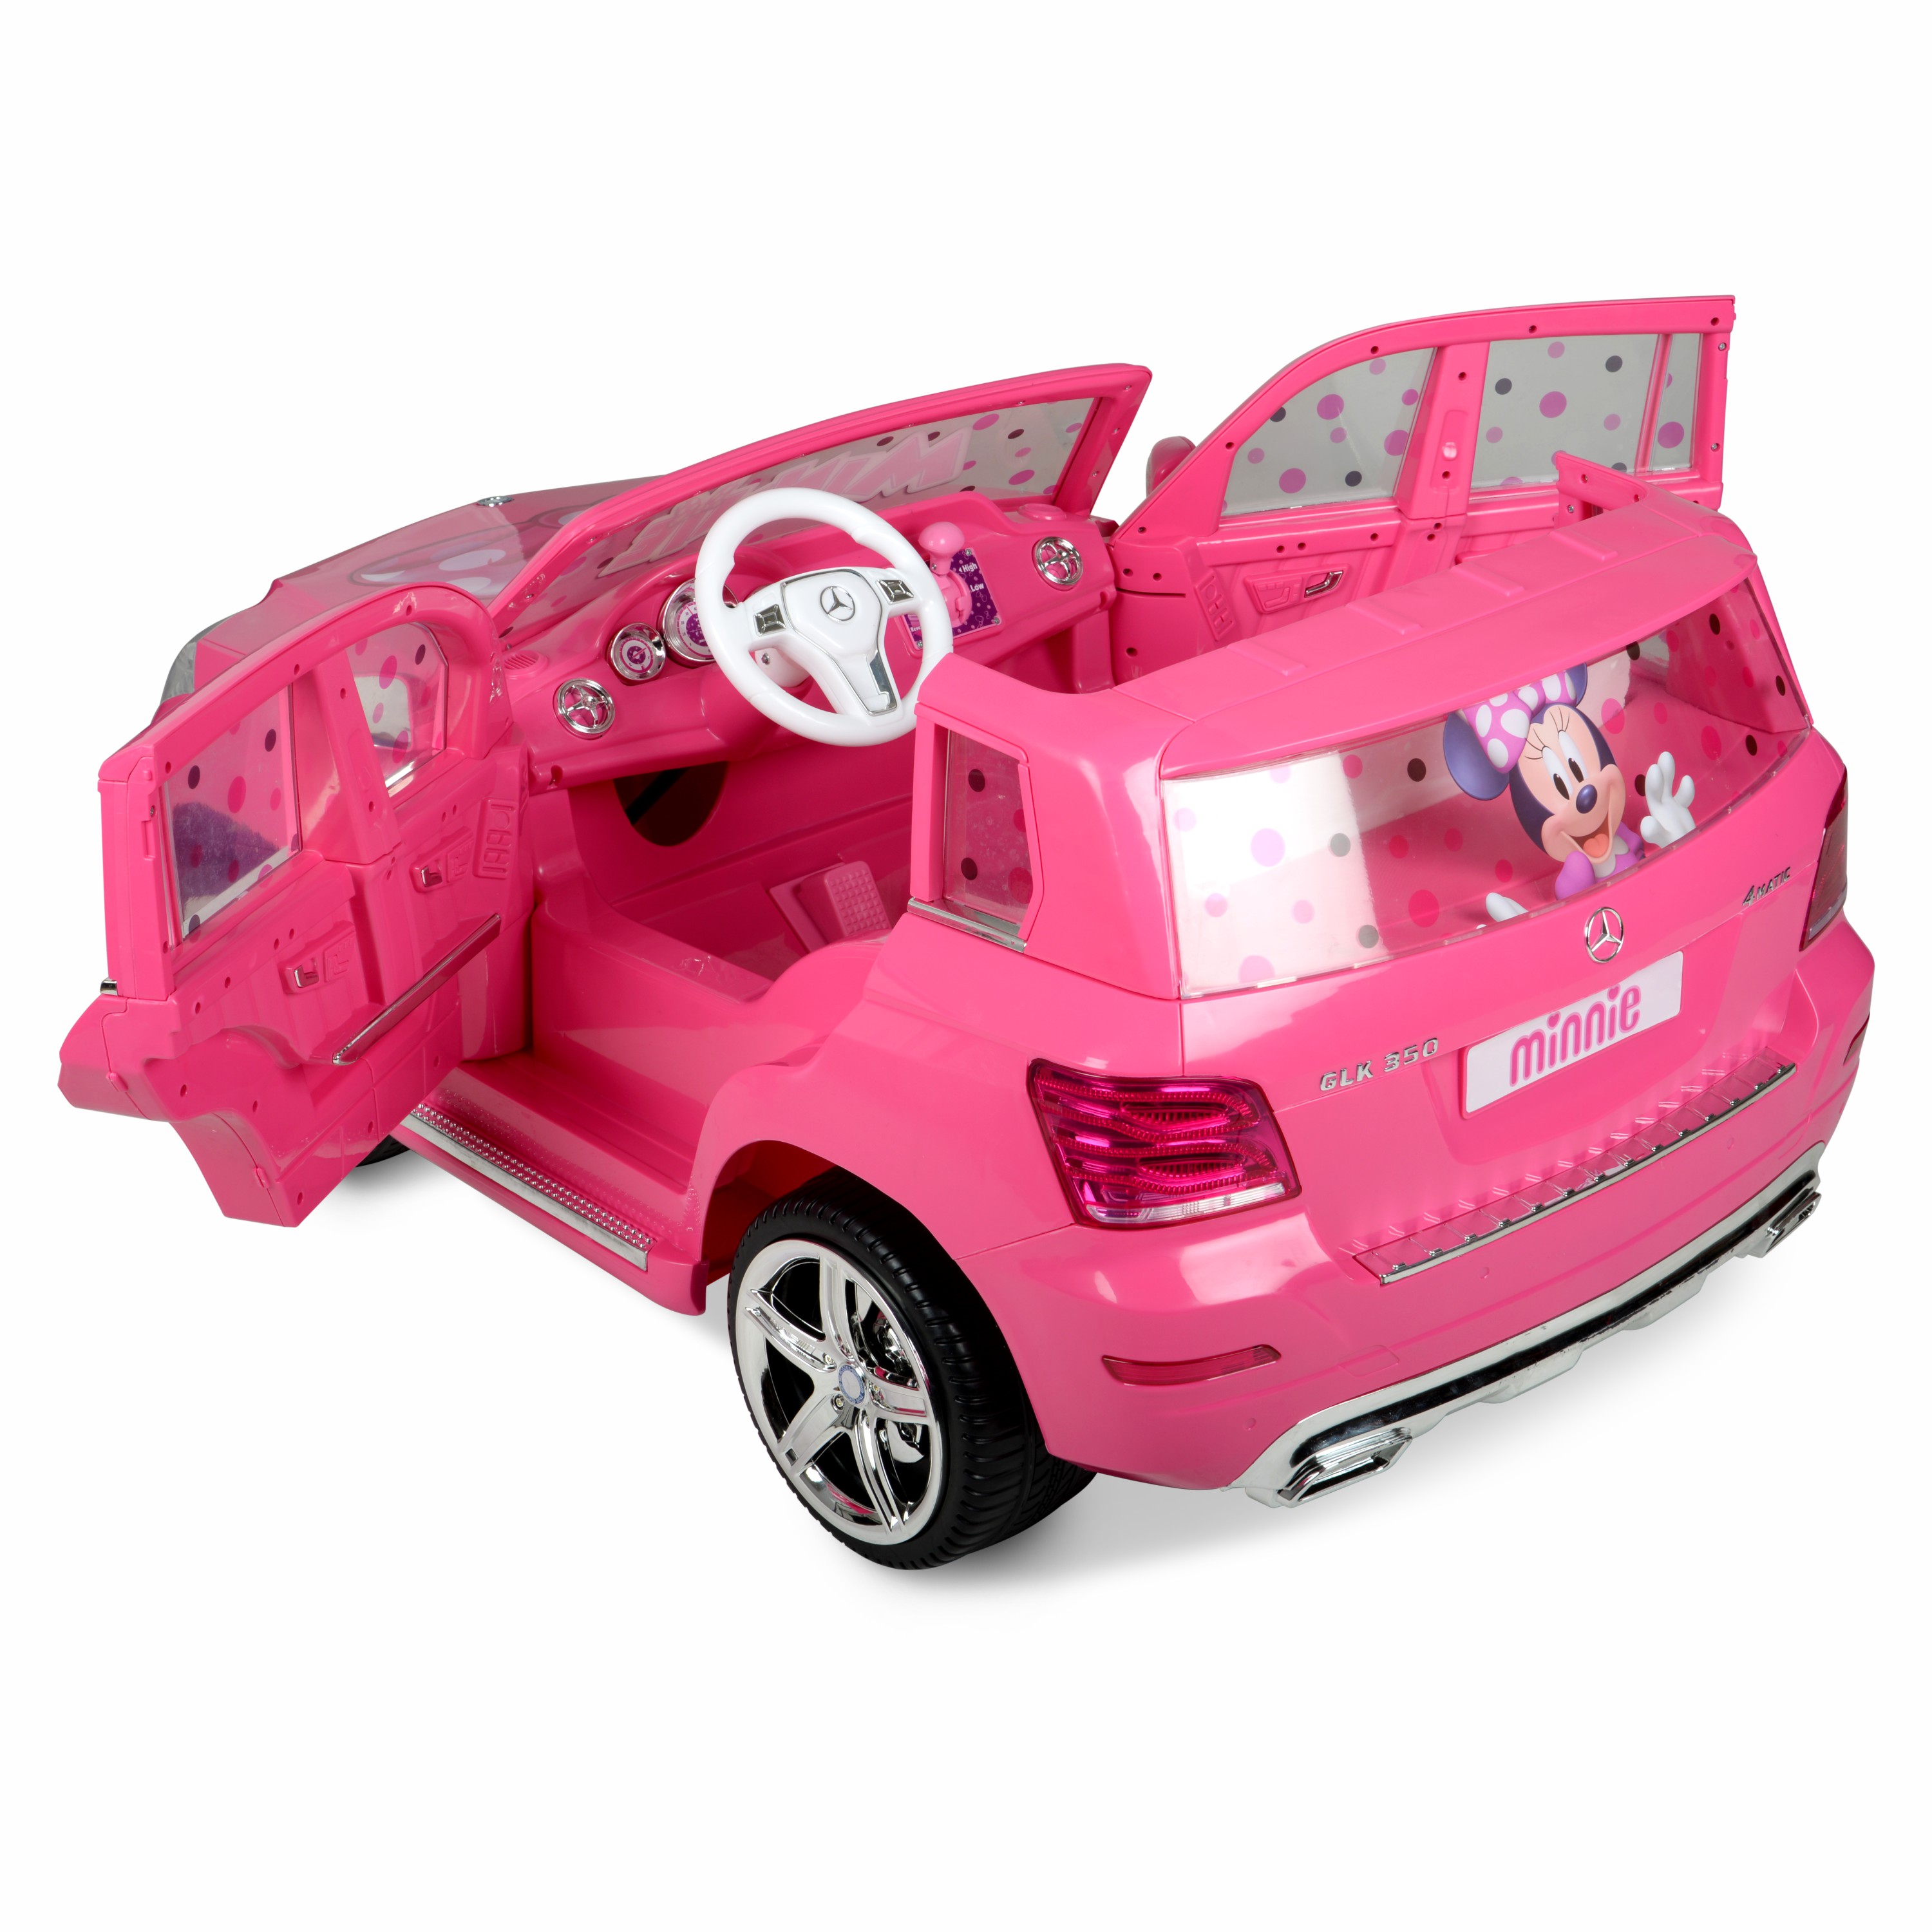 12 Volt Minnie Mouse Mercedes Battery Powered Ride On - Your little ones will ride in Luxury! - image 4 of 6